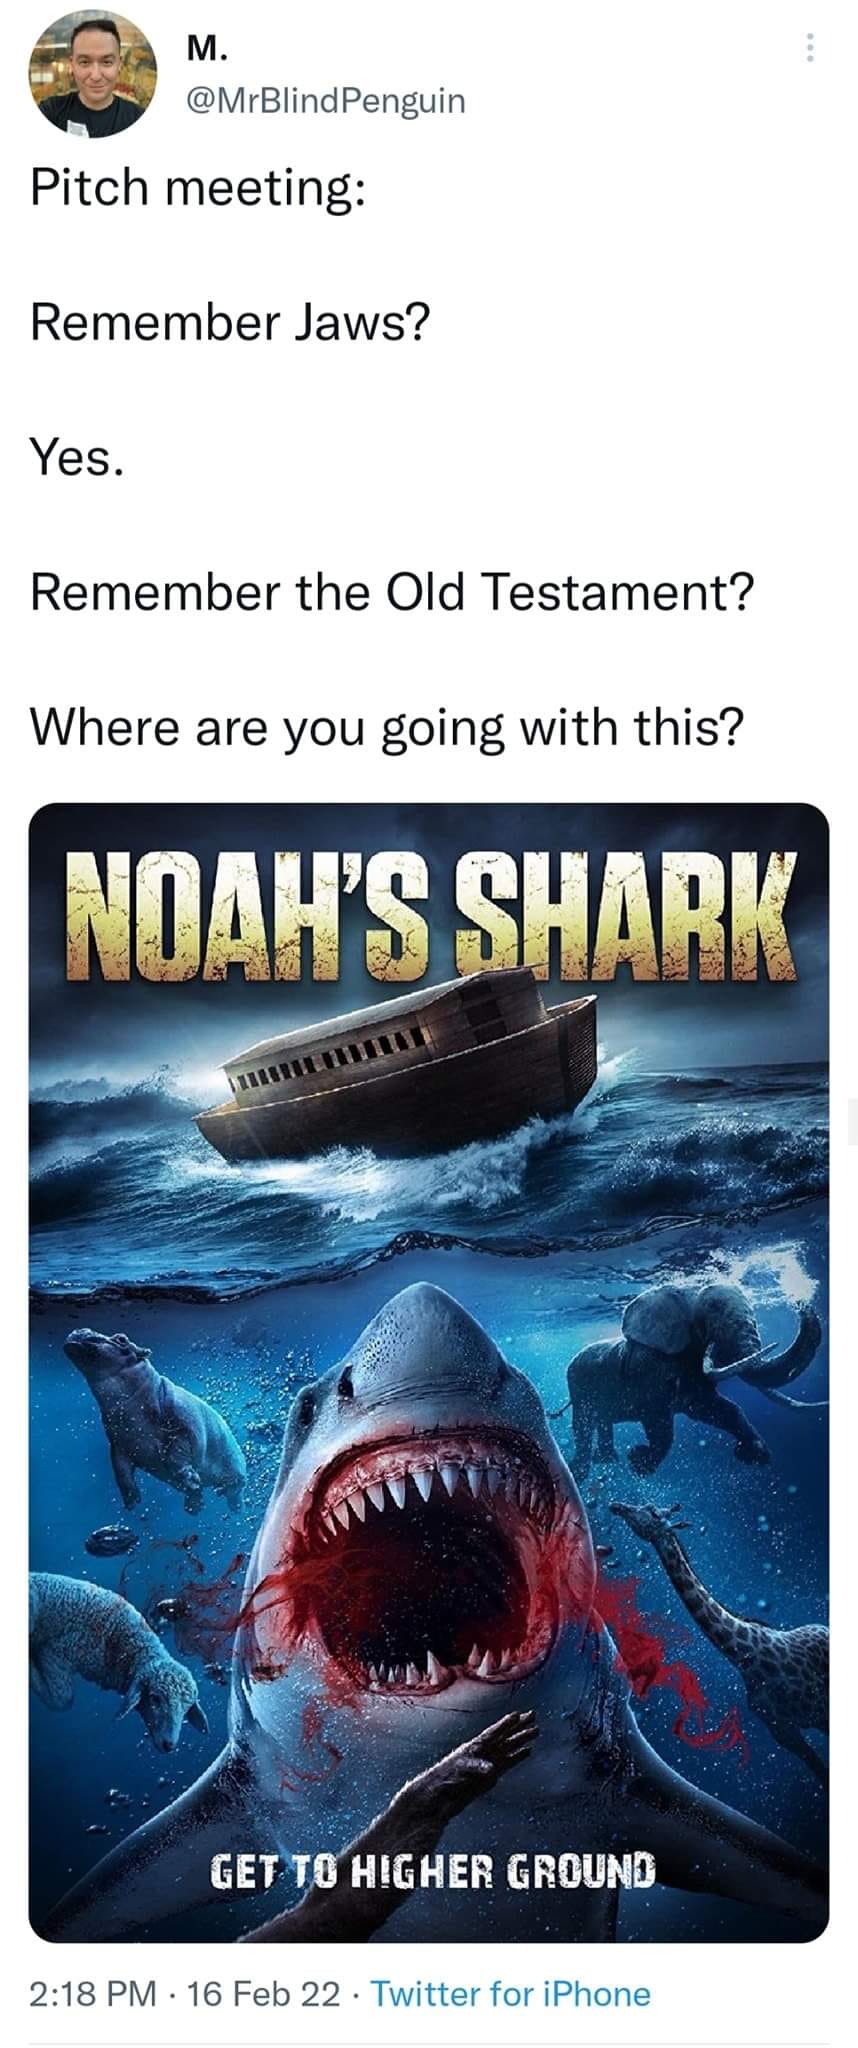 random memes and pics - Free Movie - M. Pitch meeting Remember Jaws? Yes. Remember the Old Testament? Where are you going with this? Noah'S Shark Get To Higher Ground 16 Feb 22 Twitter for iPhone .